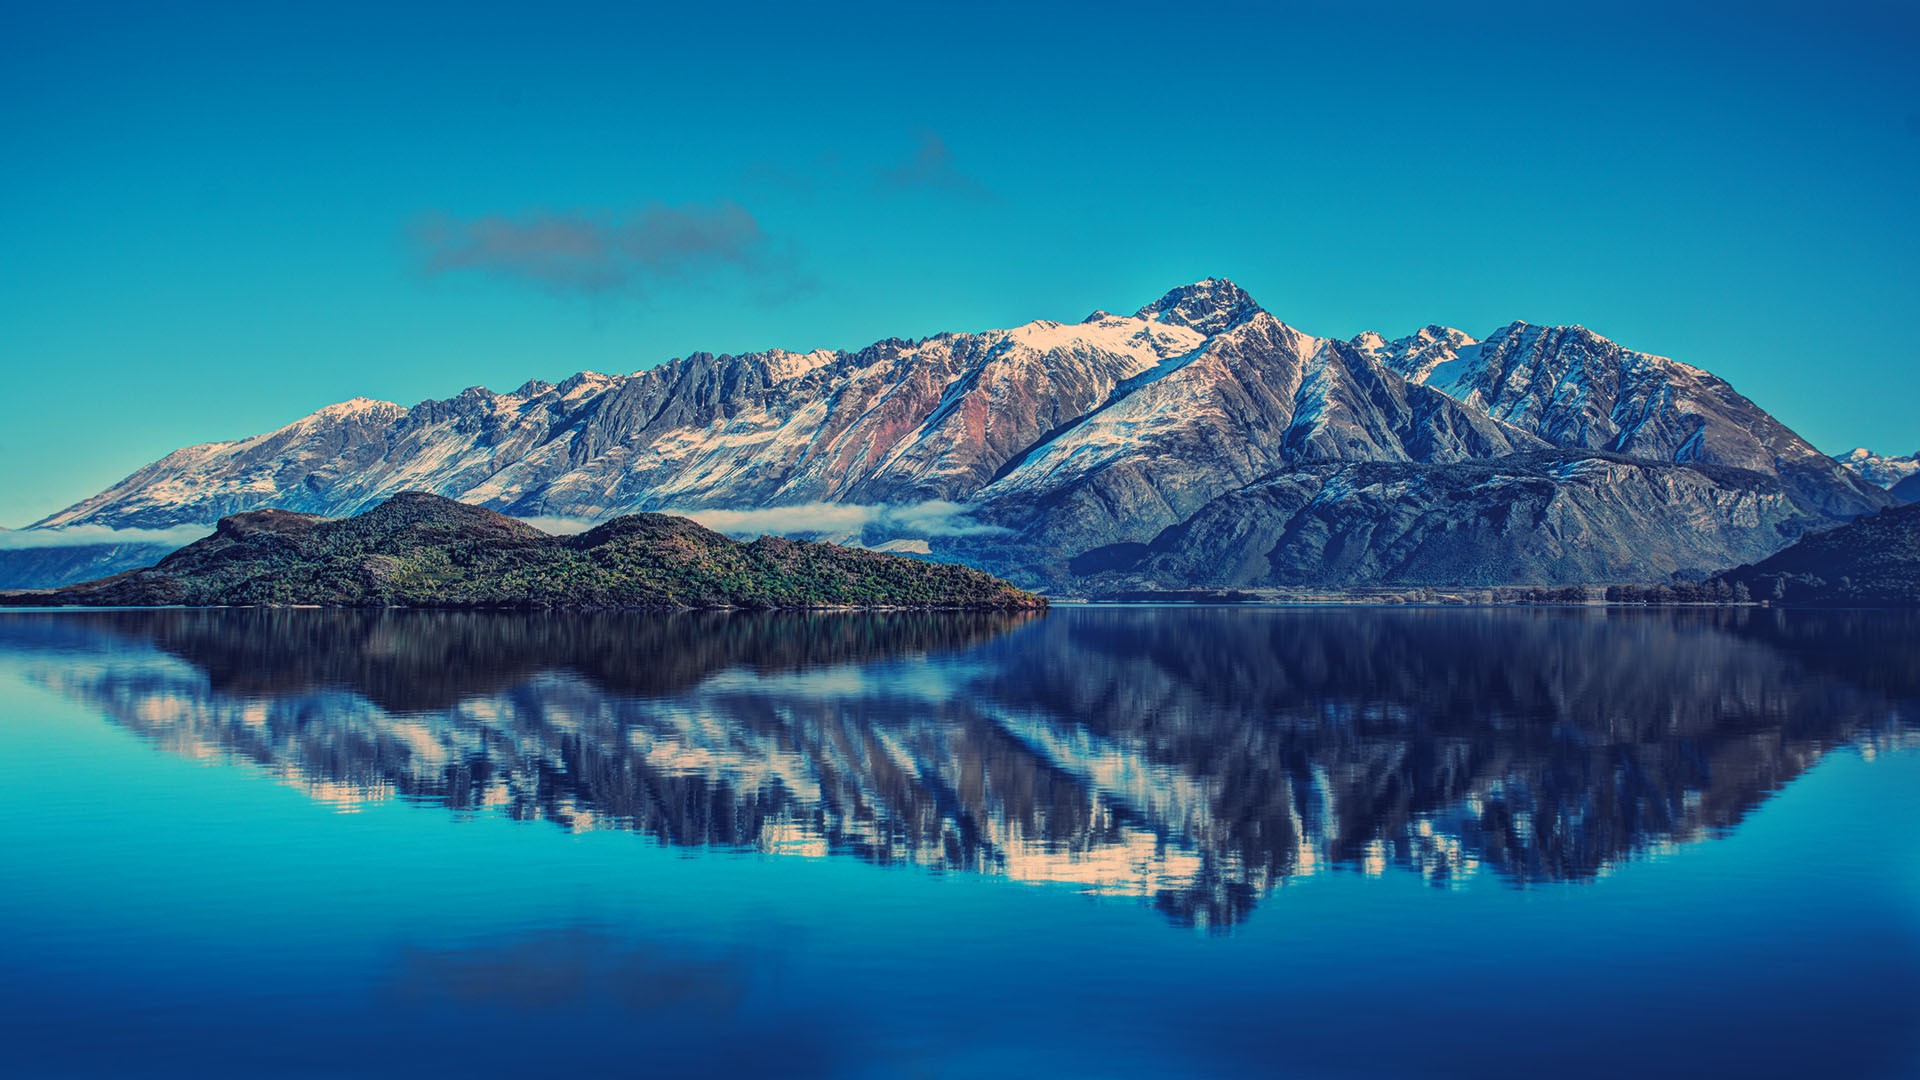 General 1920x1080 landscape mountains lake water reflection nature calm waters clear sky blue Lake Pukaki New Zealand